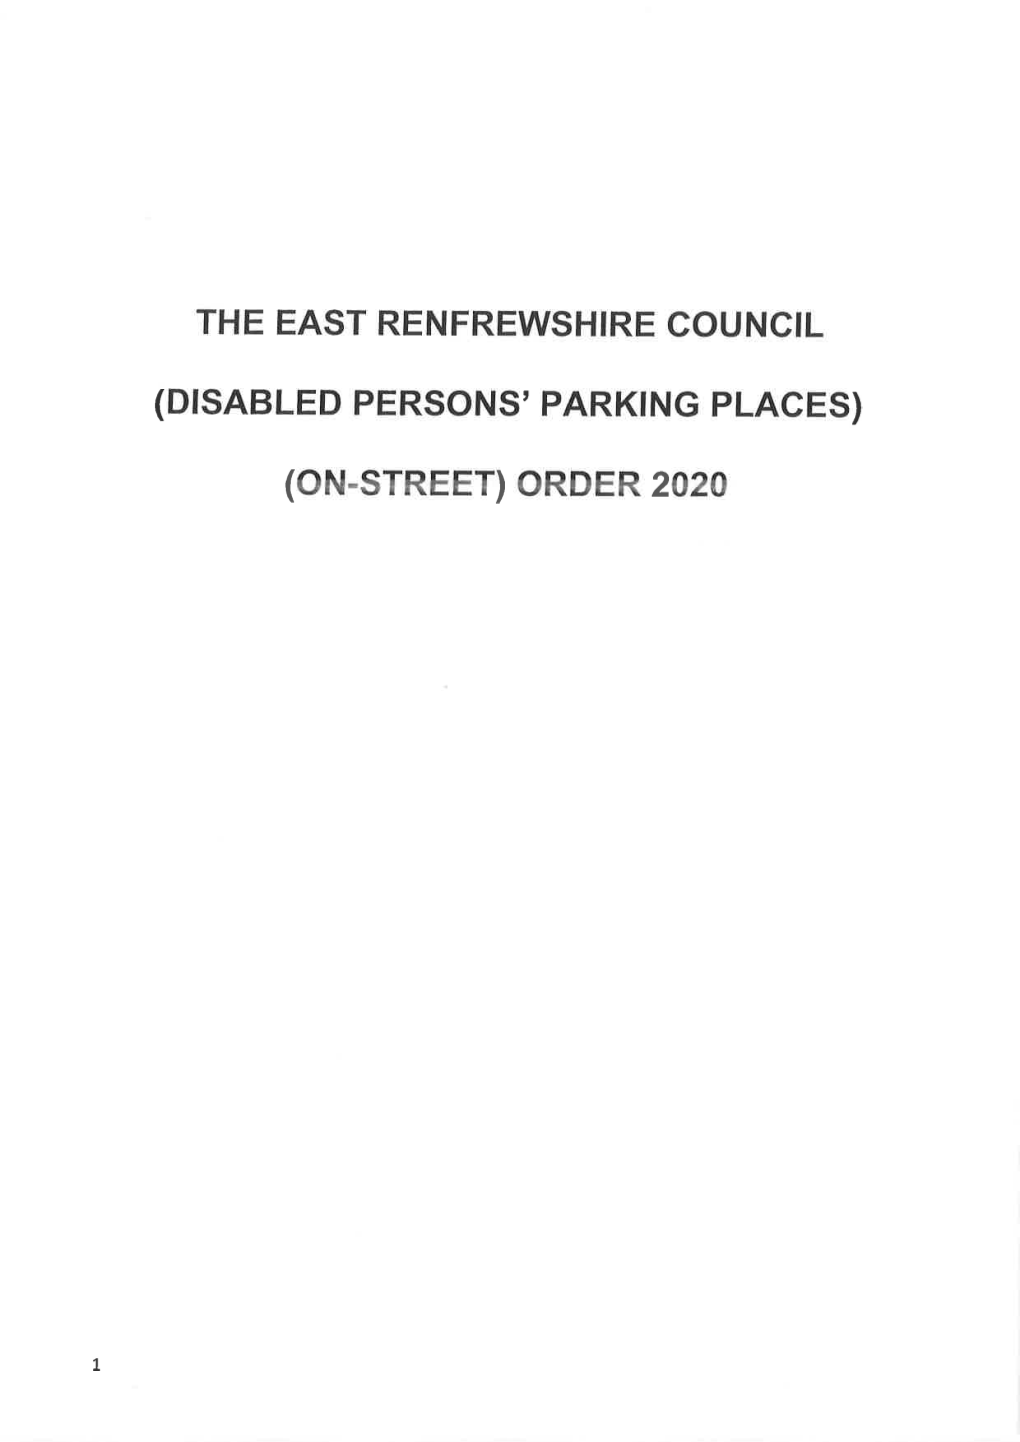 The-ERC-Disabled-Persons-Parking-Places-On-Street-Order-2020.Pdf